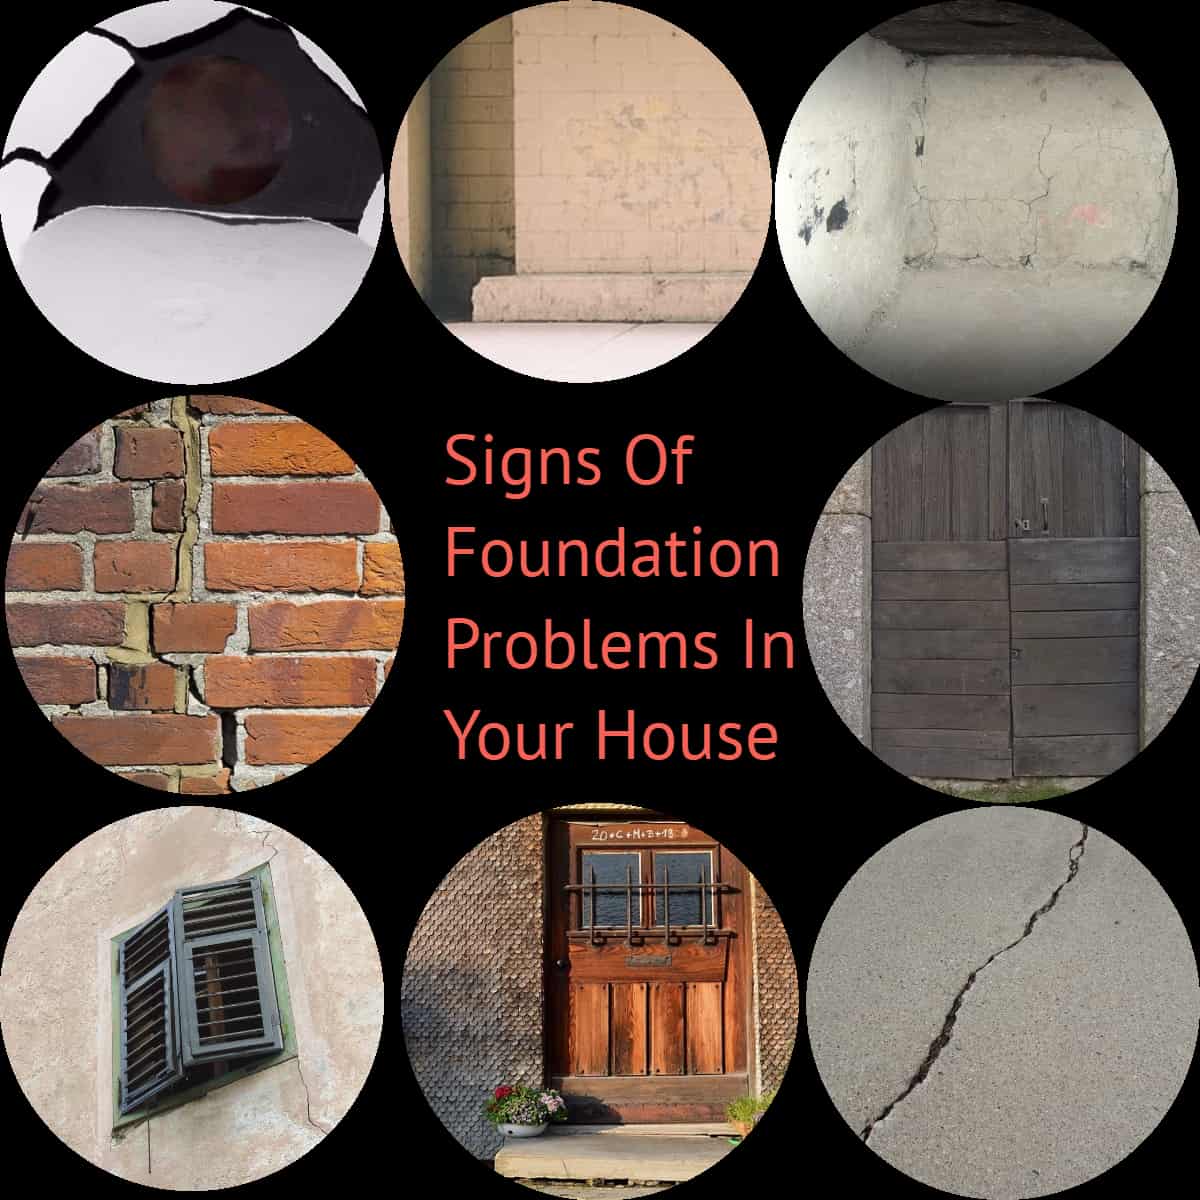 Signs of Foundation Problems in Your House